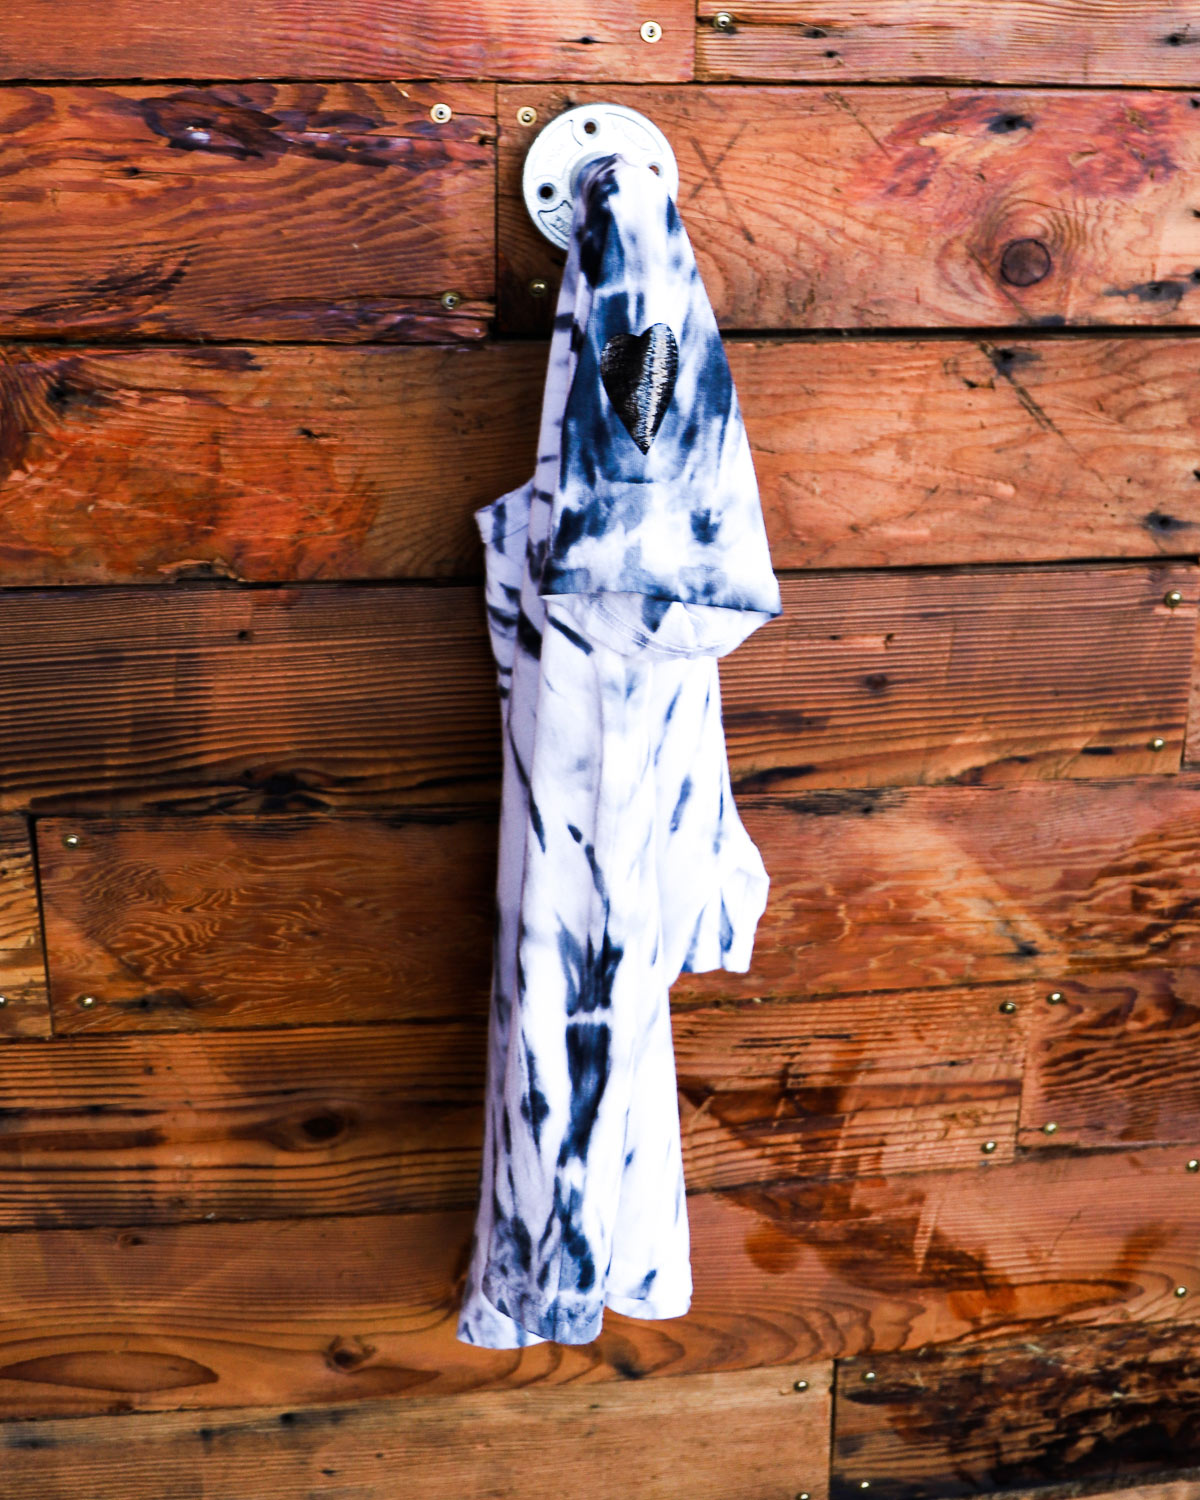 White hand dyed spiral tie dye t-shirt on a hanger in front of a weathered wood wall